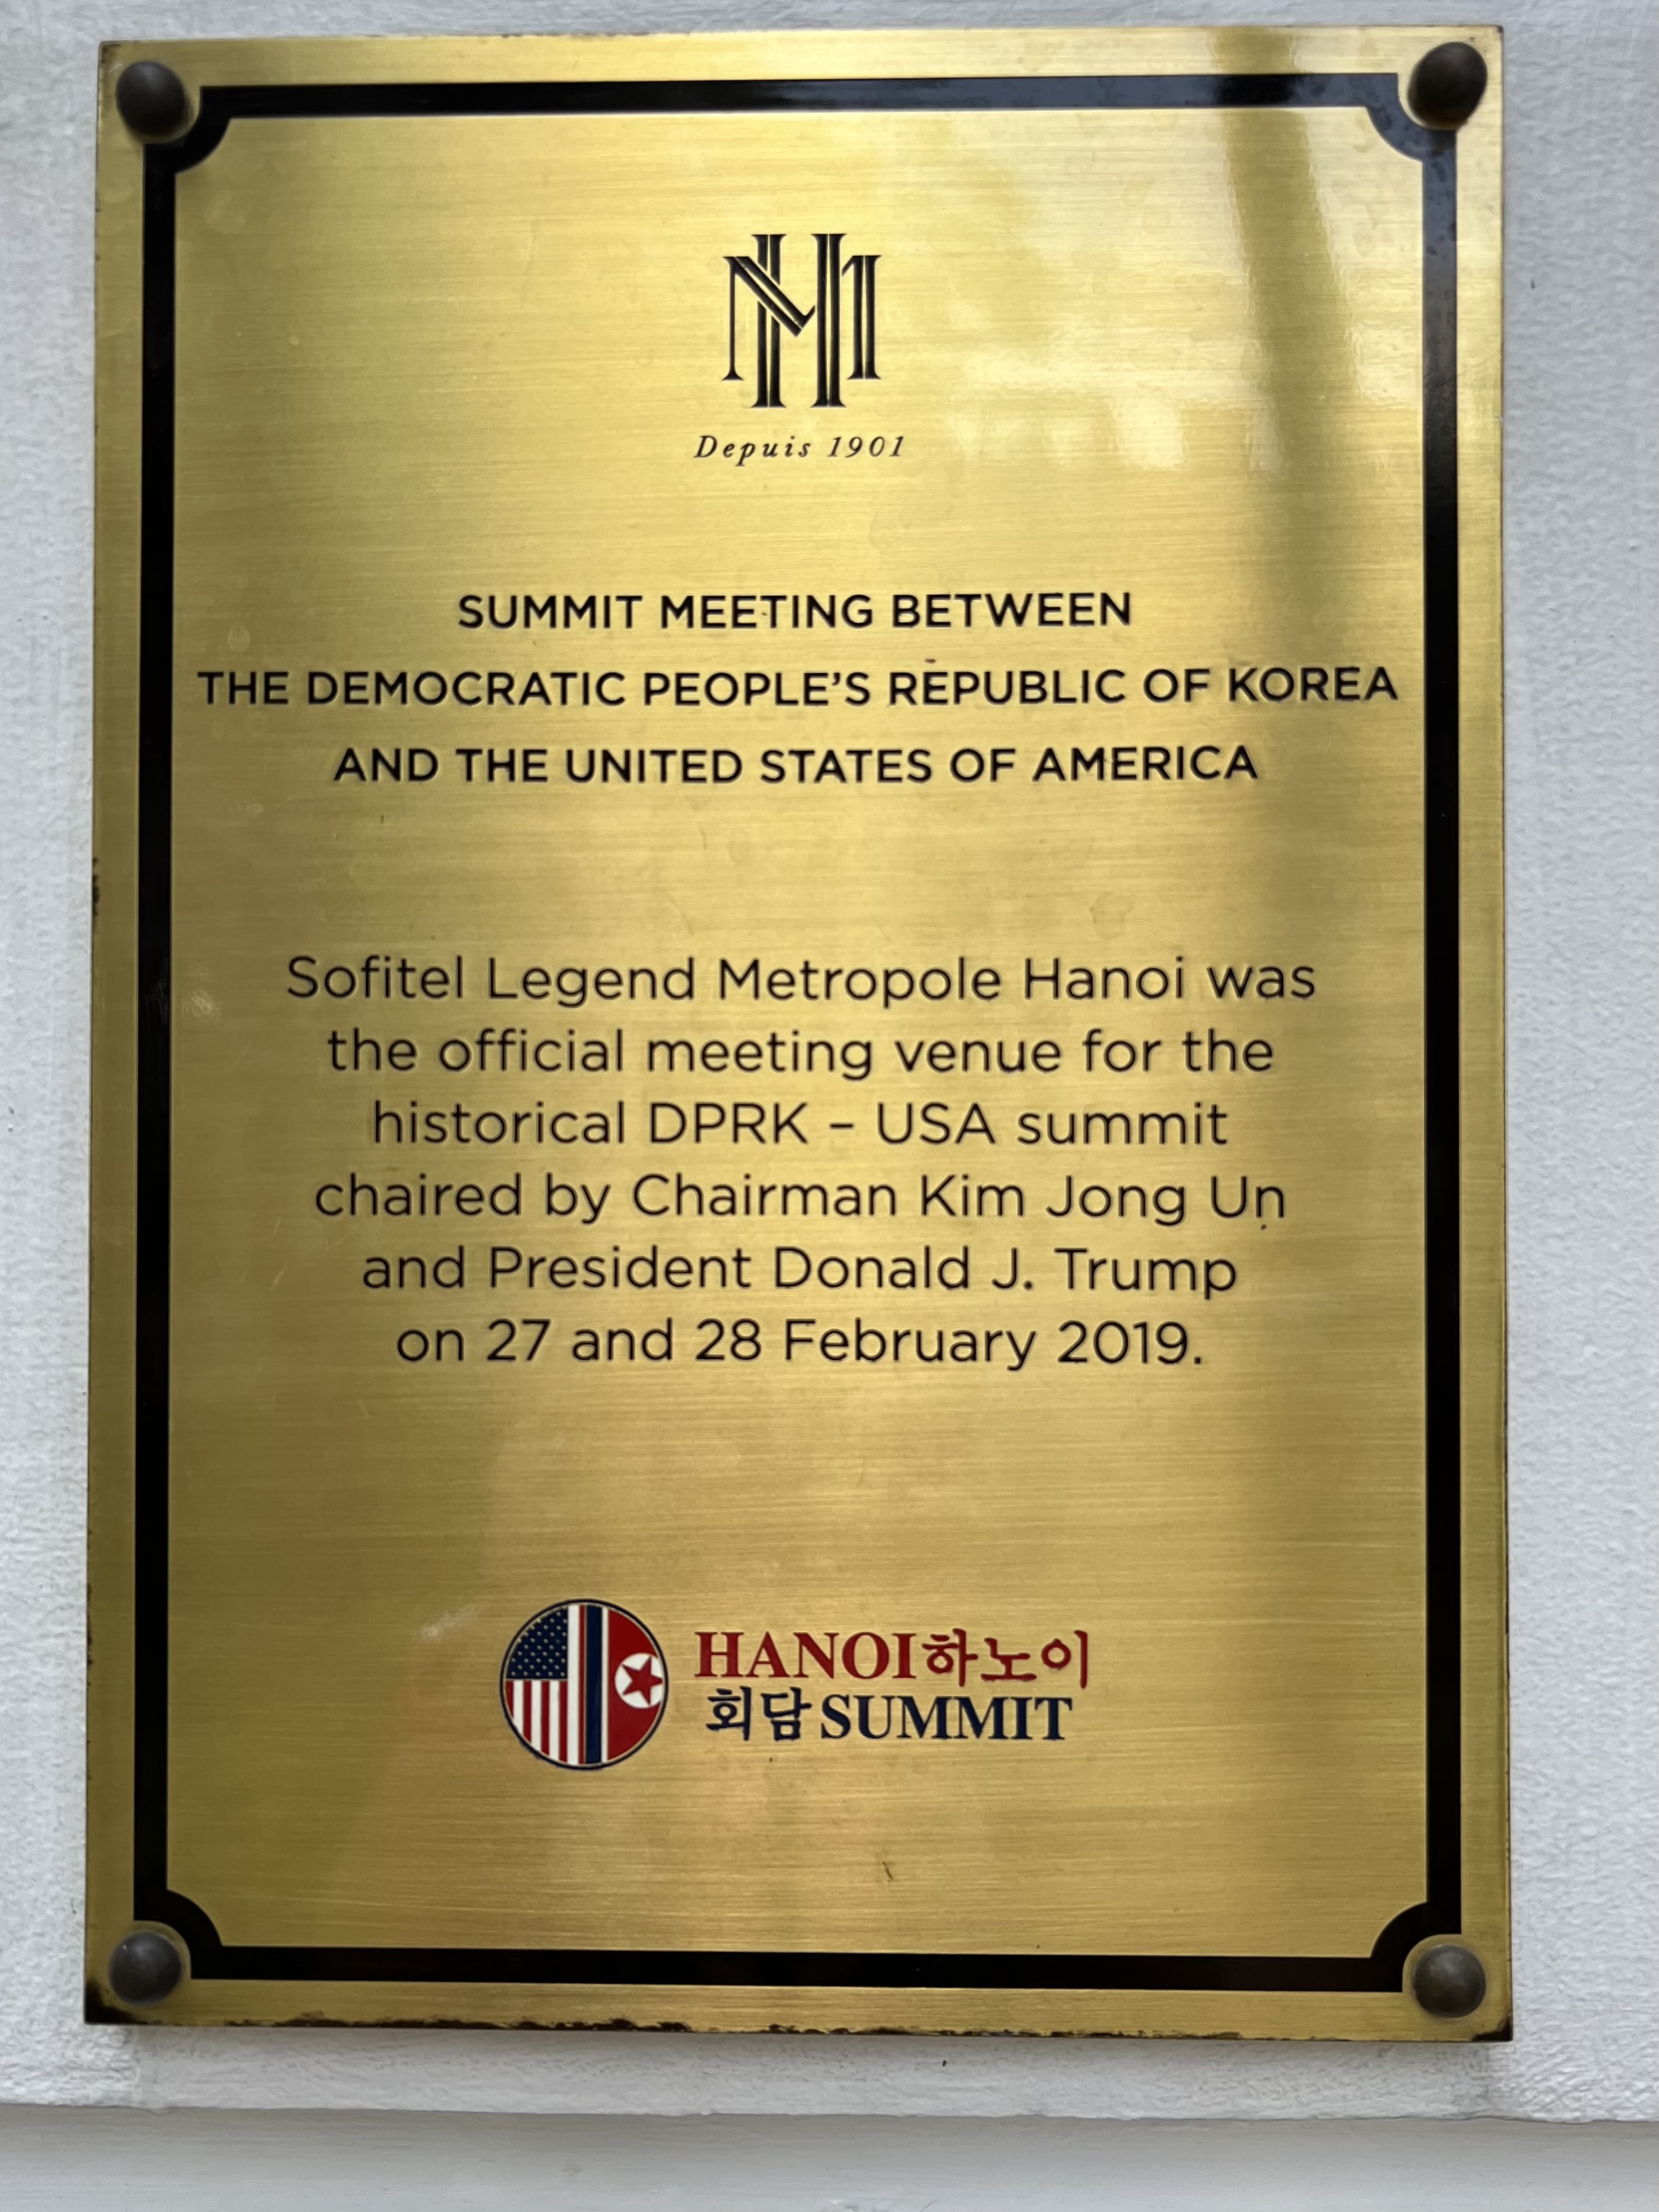 a gold plaque with black text and a logo